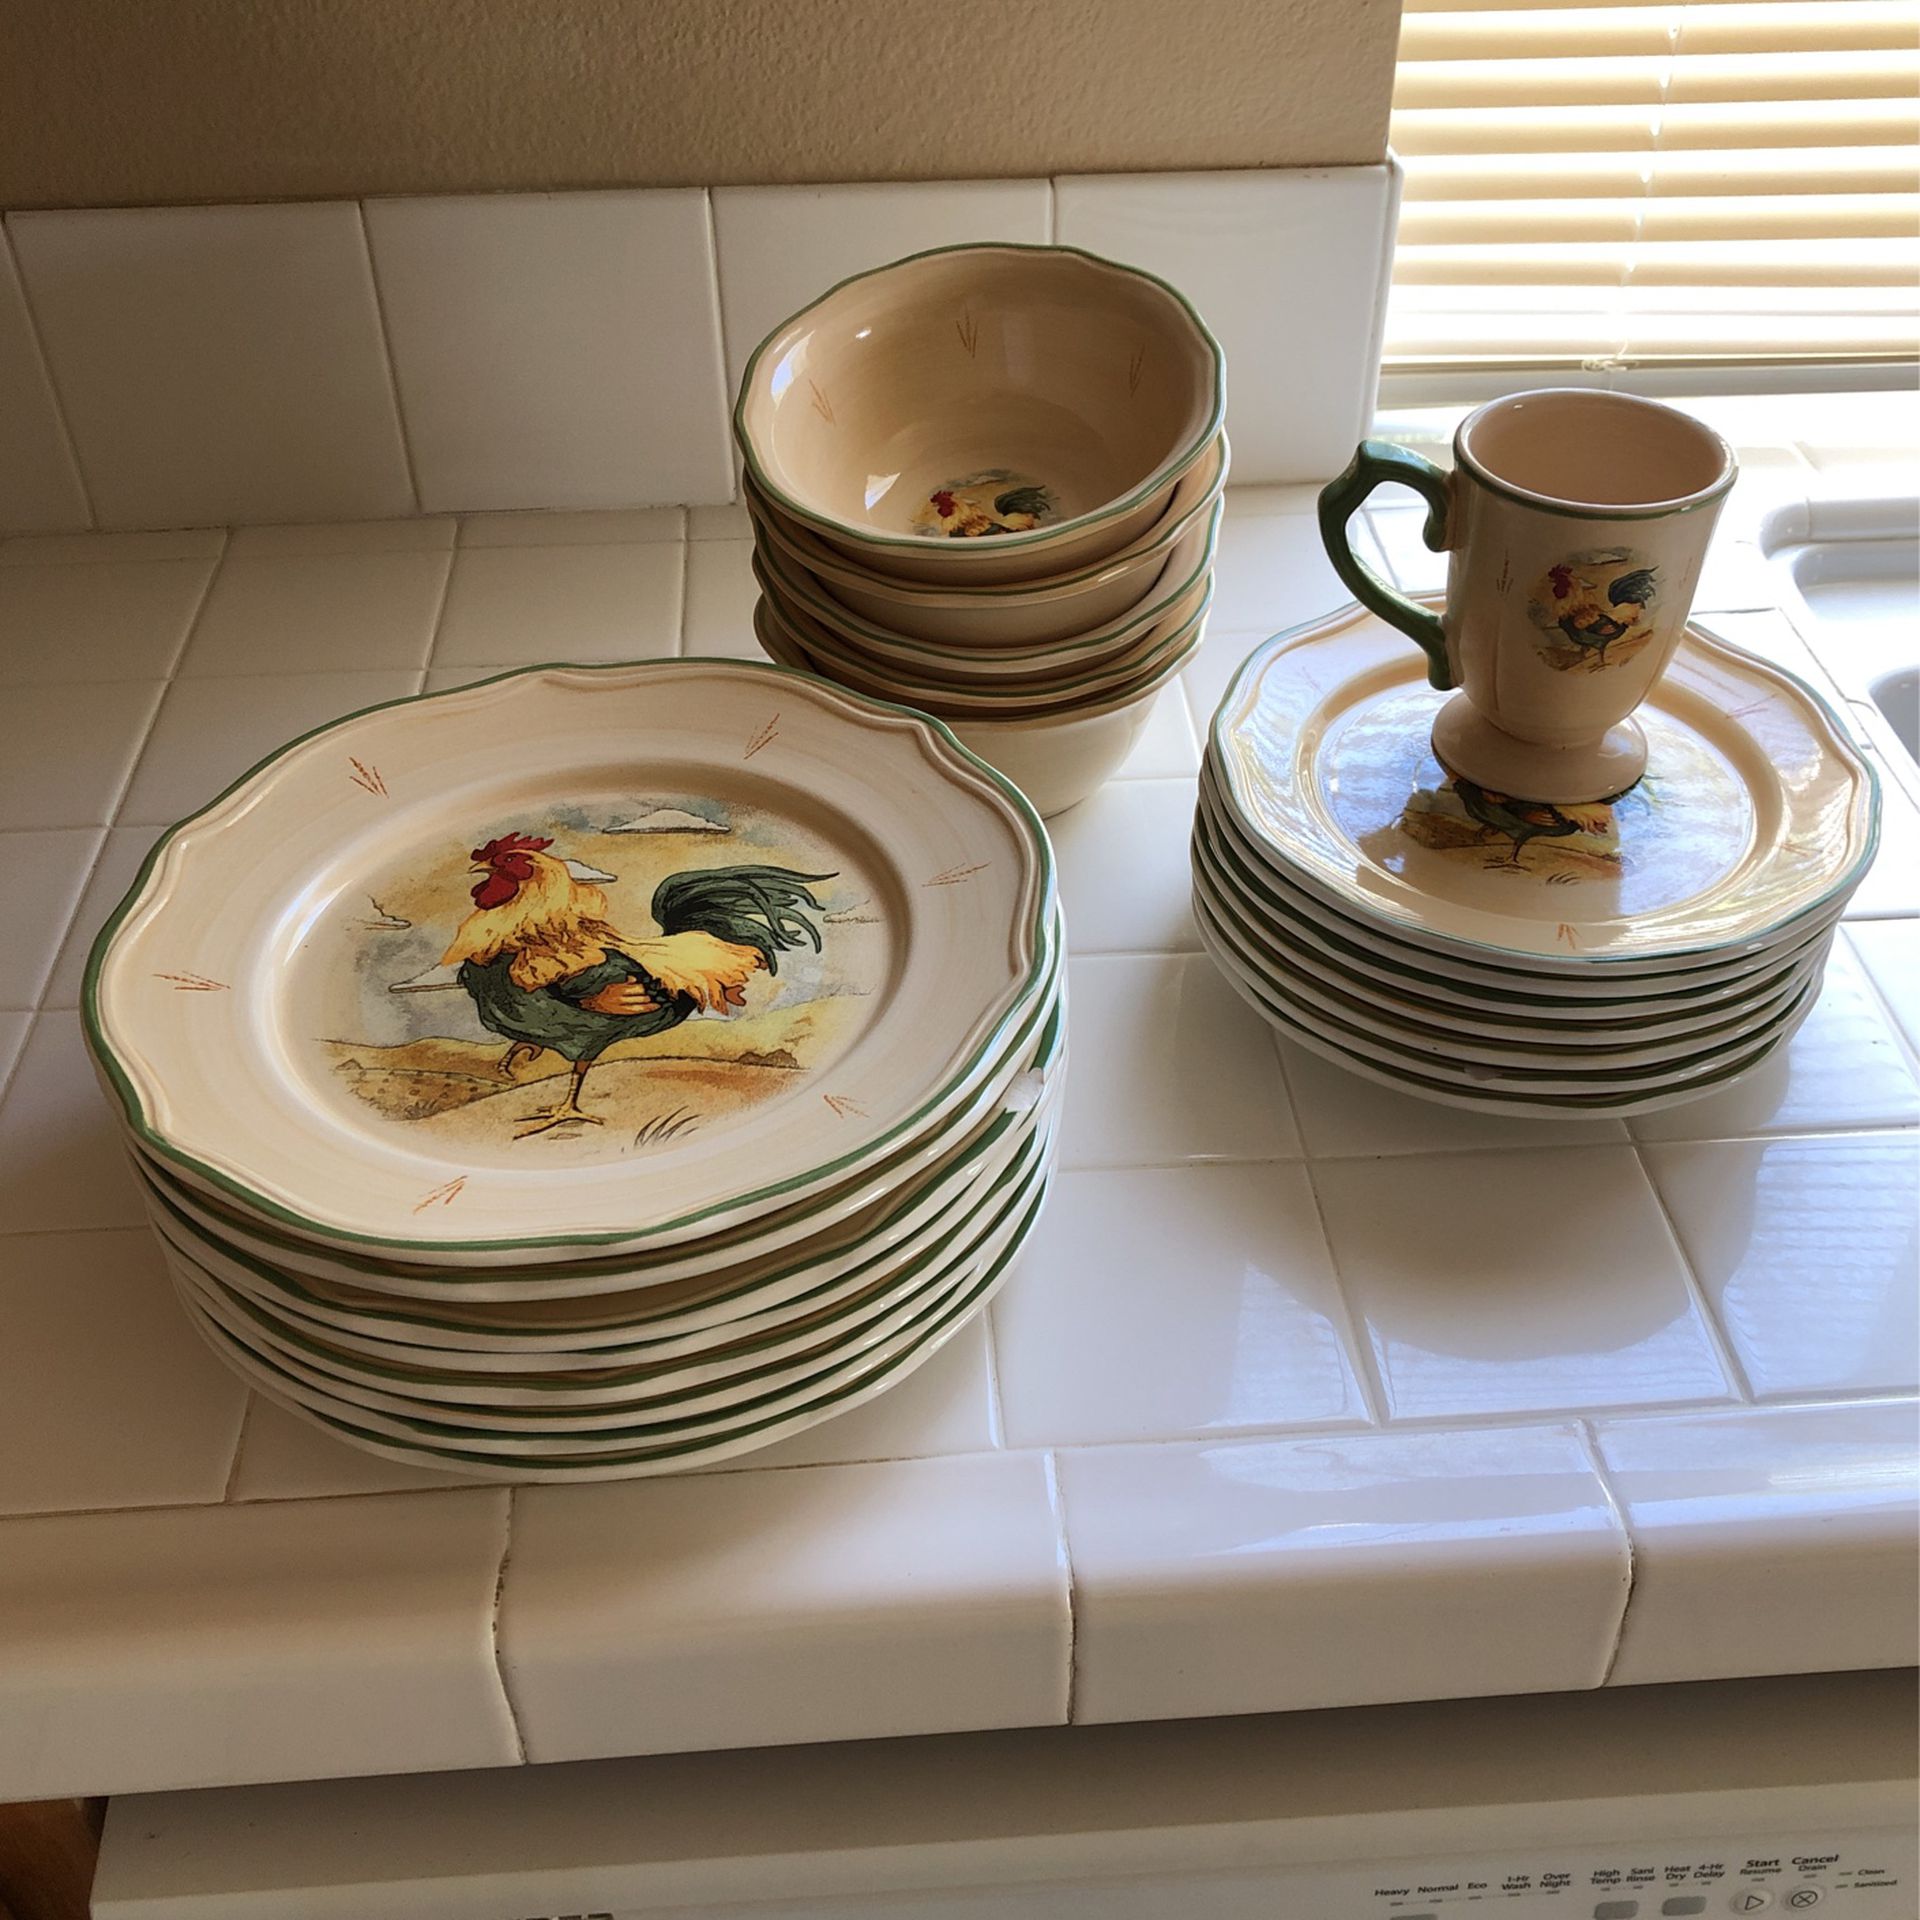 8 Dinner Plate/ 1 With Small Chip  7 Salad Plates  8 Bowls  8 Coffee Mugs